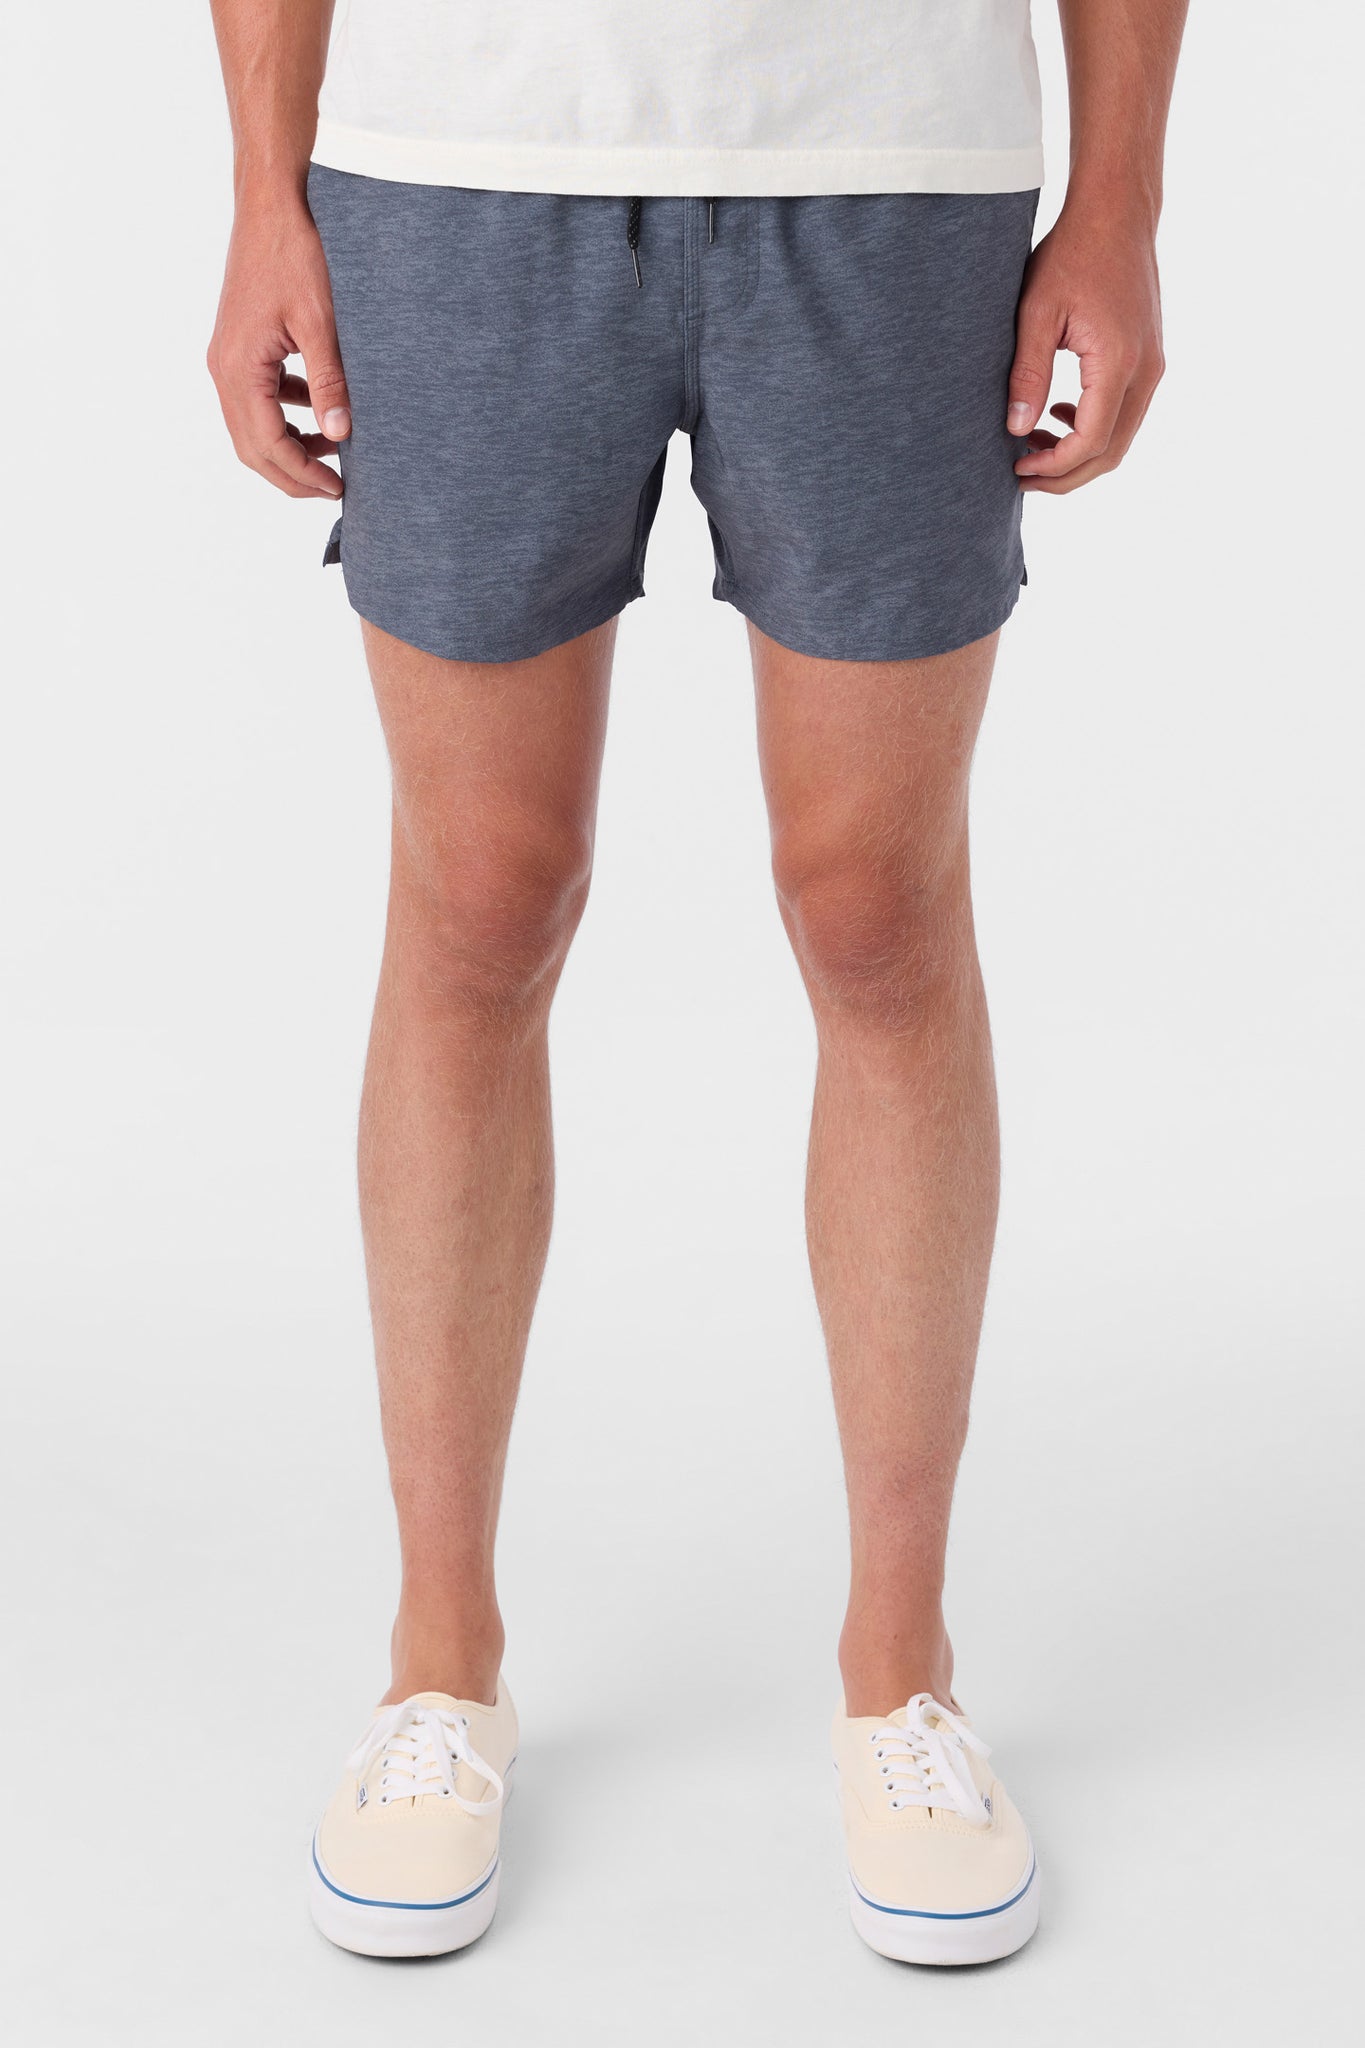 PERFORM LINED 15" ATHLETIC SHORTS